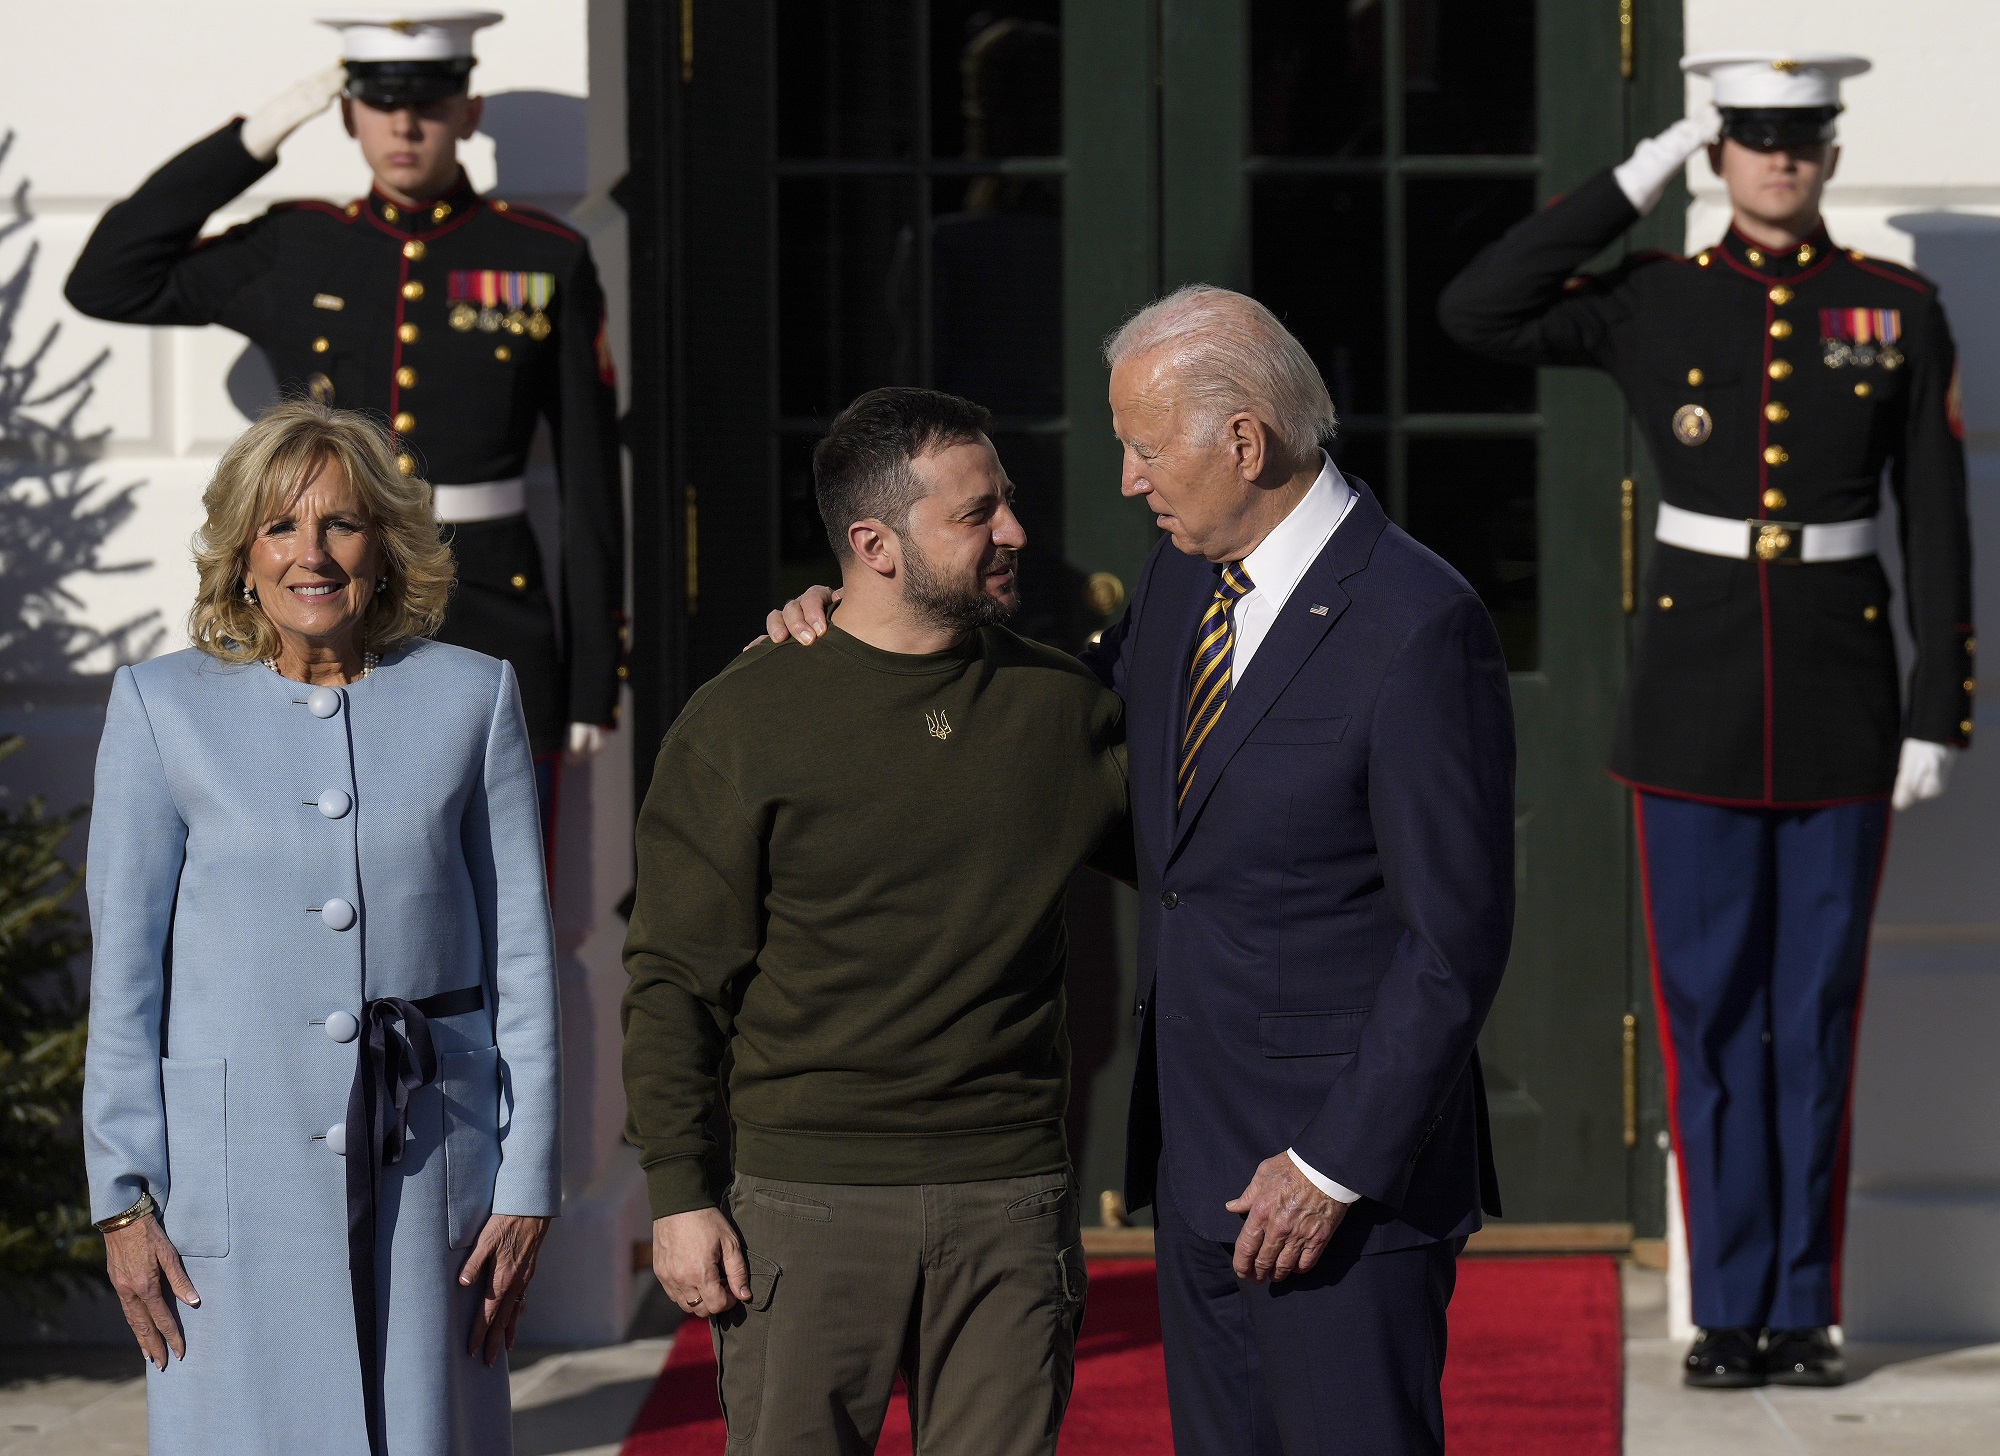 Zelensky meets with Biden to thank more military aid and strengthen alliance against Russia